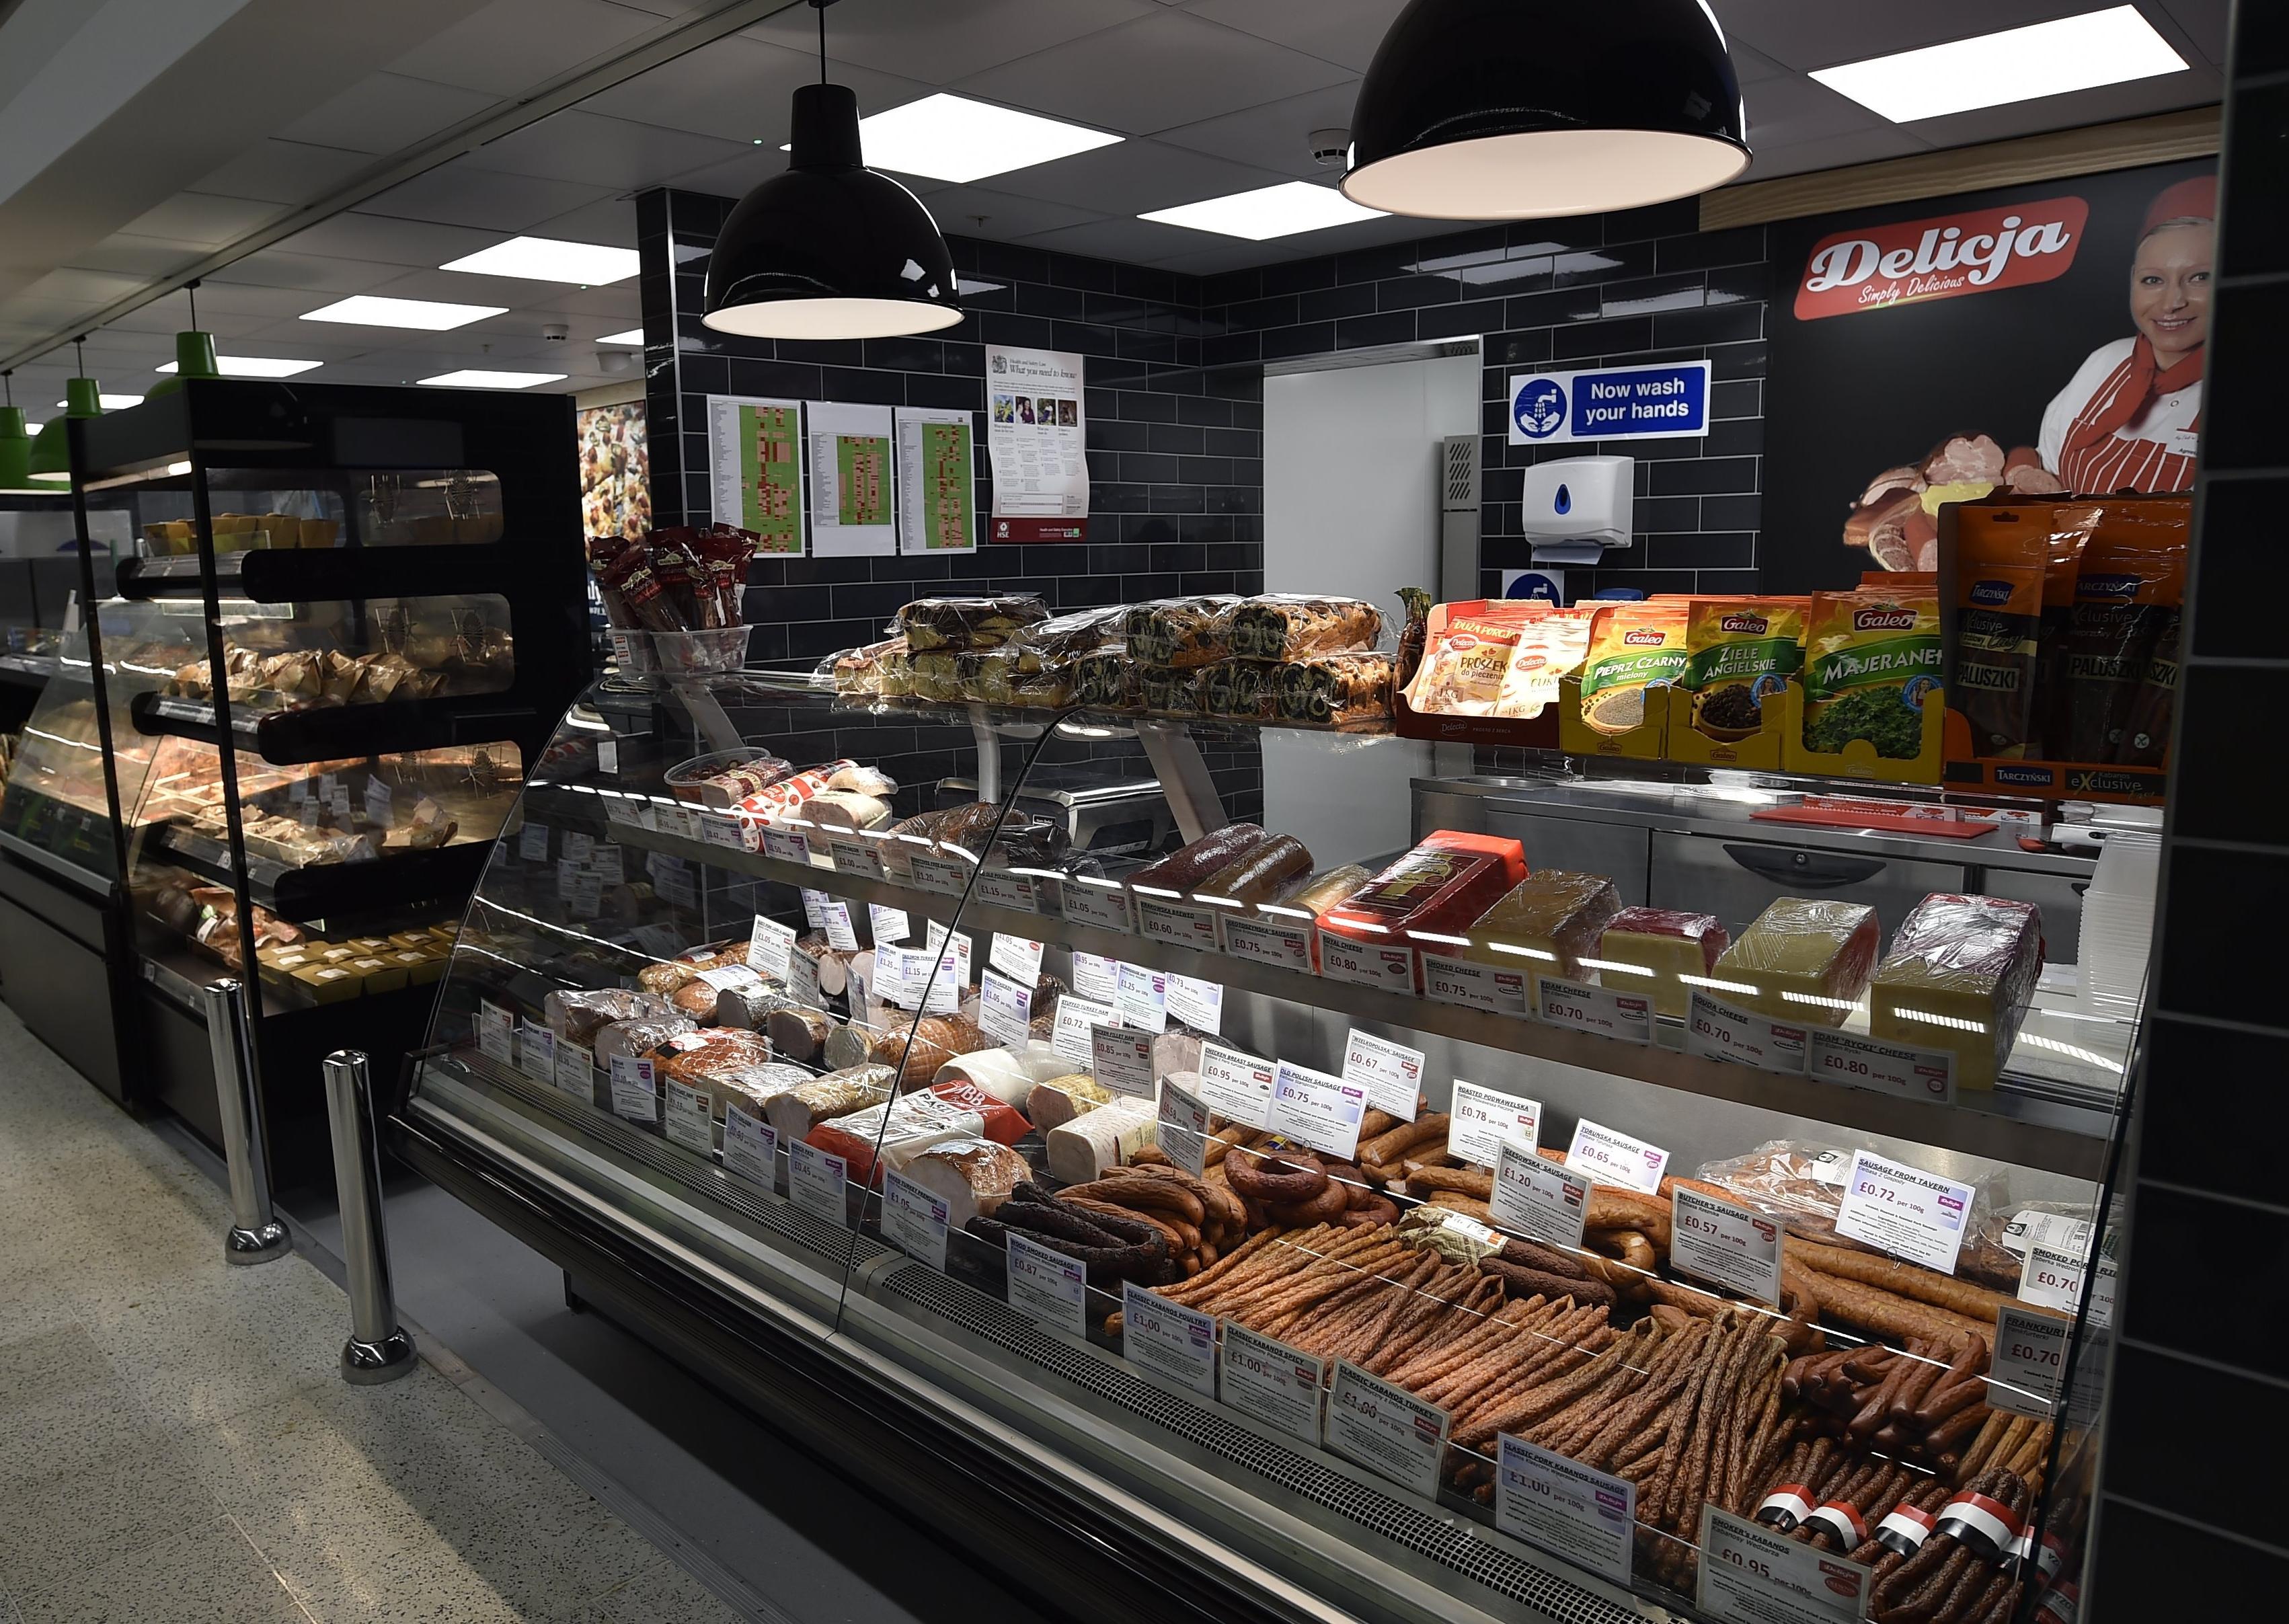 Asda has two new food counters